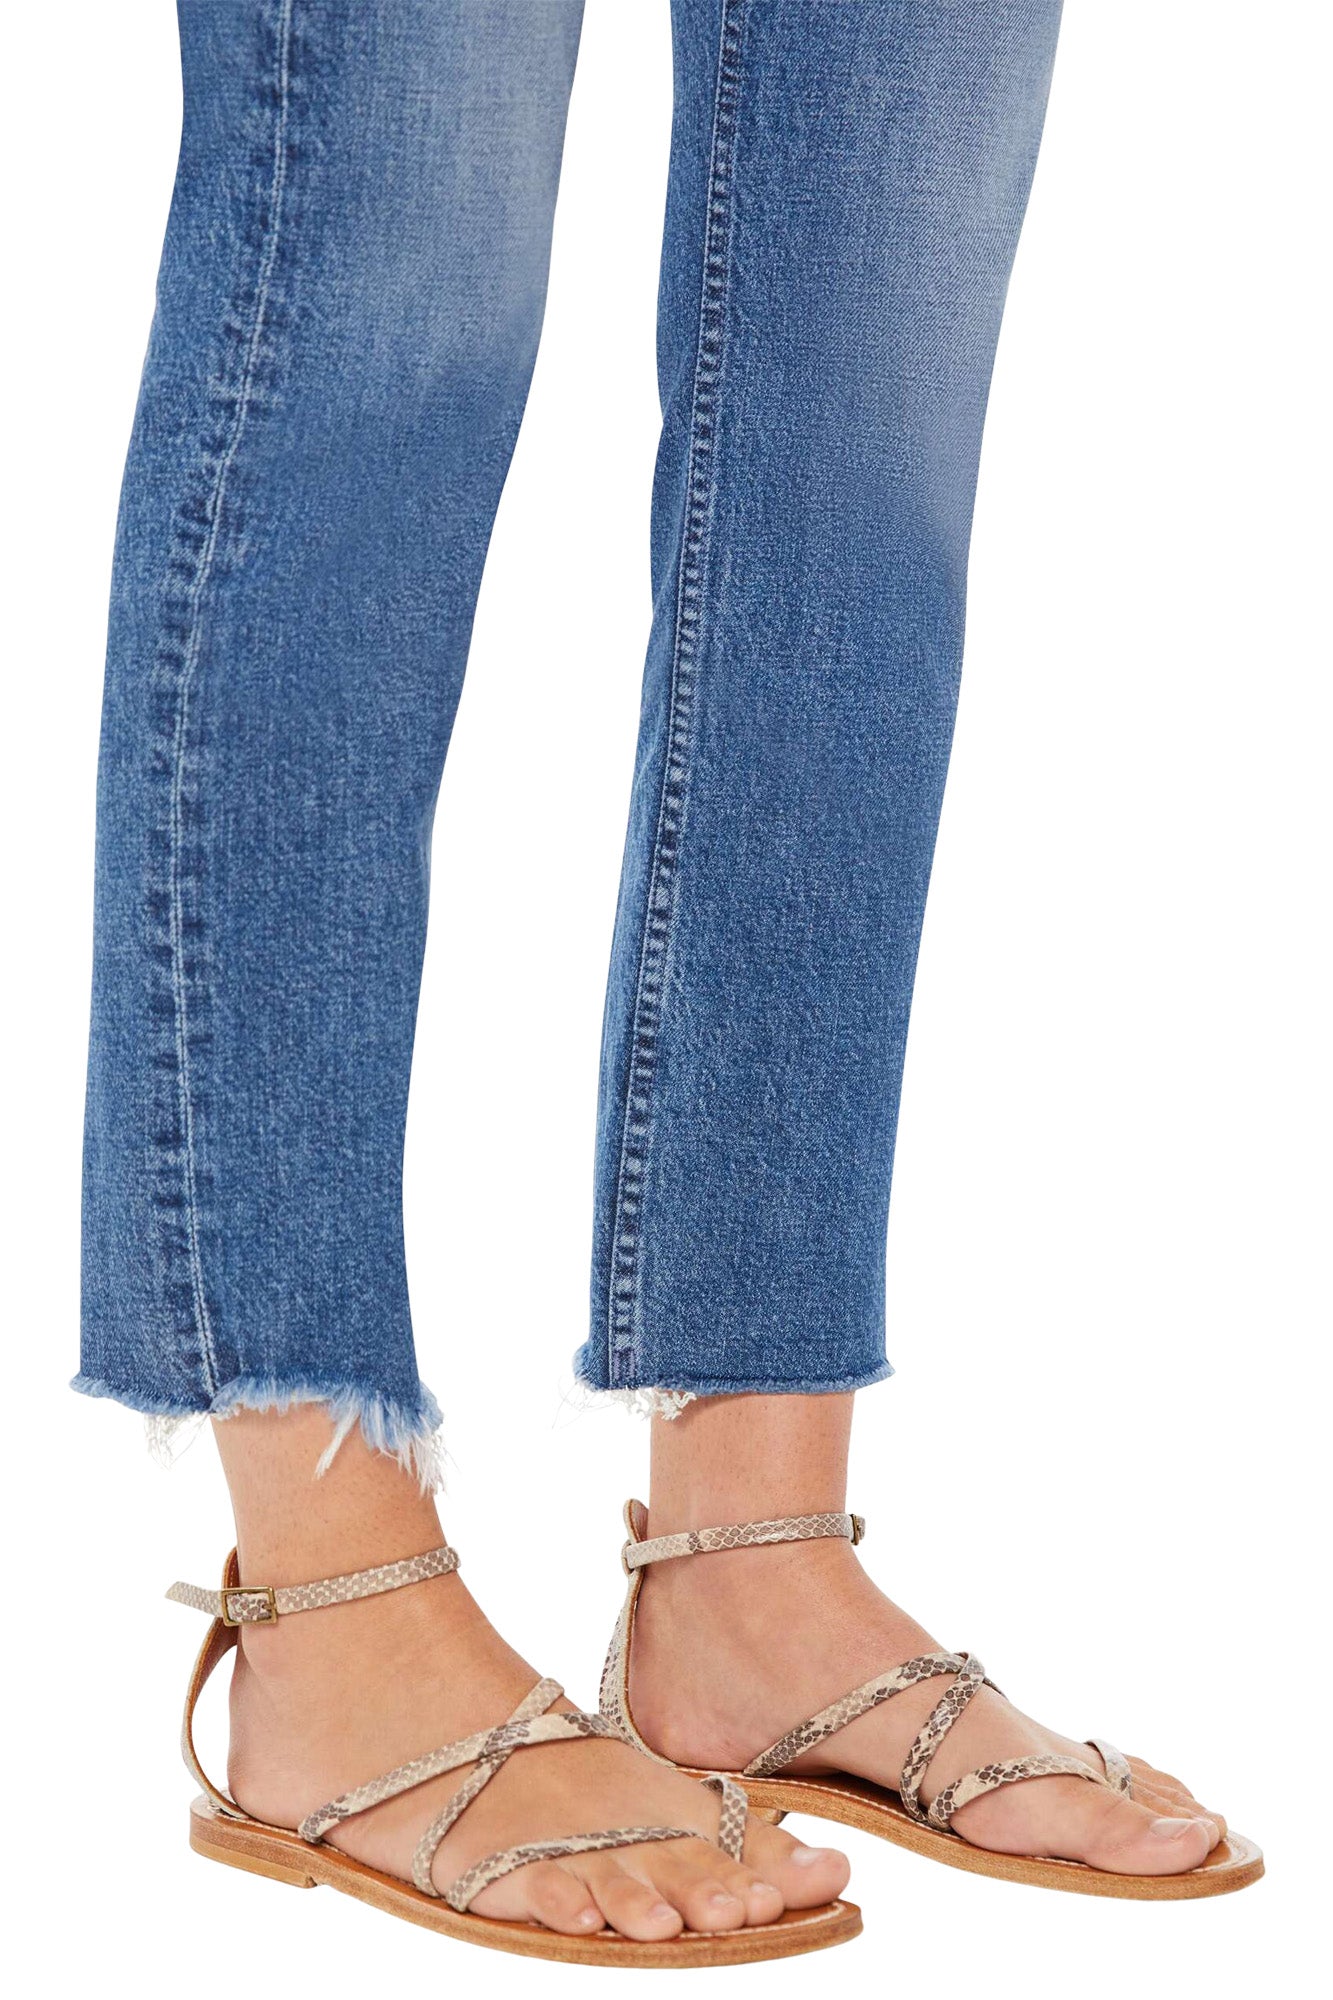 MOTHER Denim The Mid Rise Rider Ankle Fray
 in Local Charm